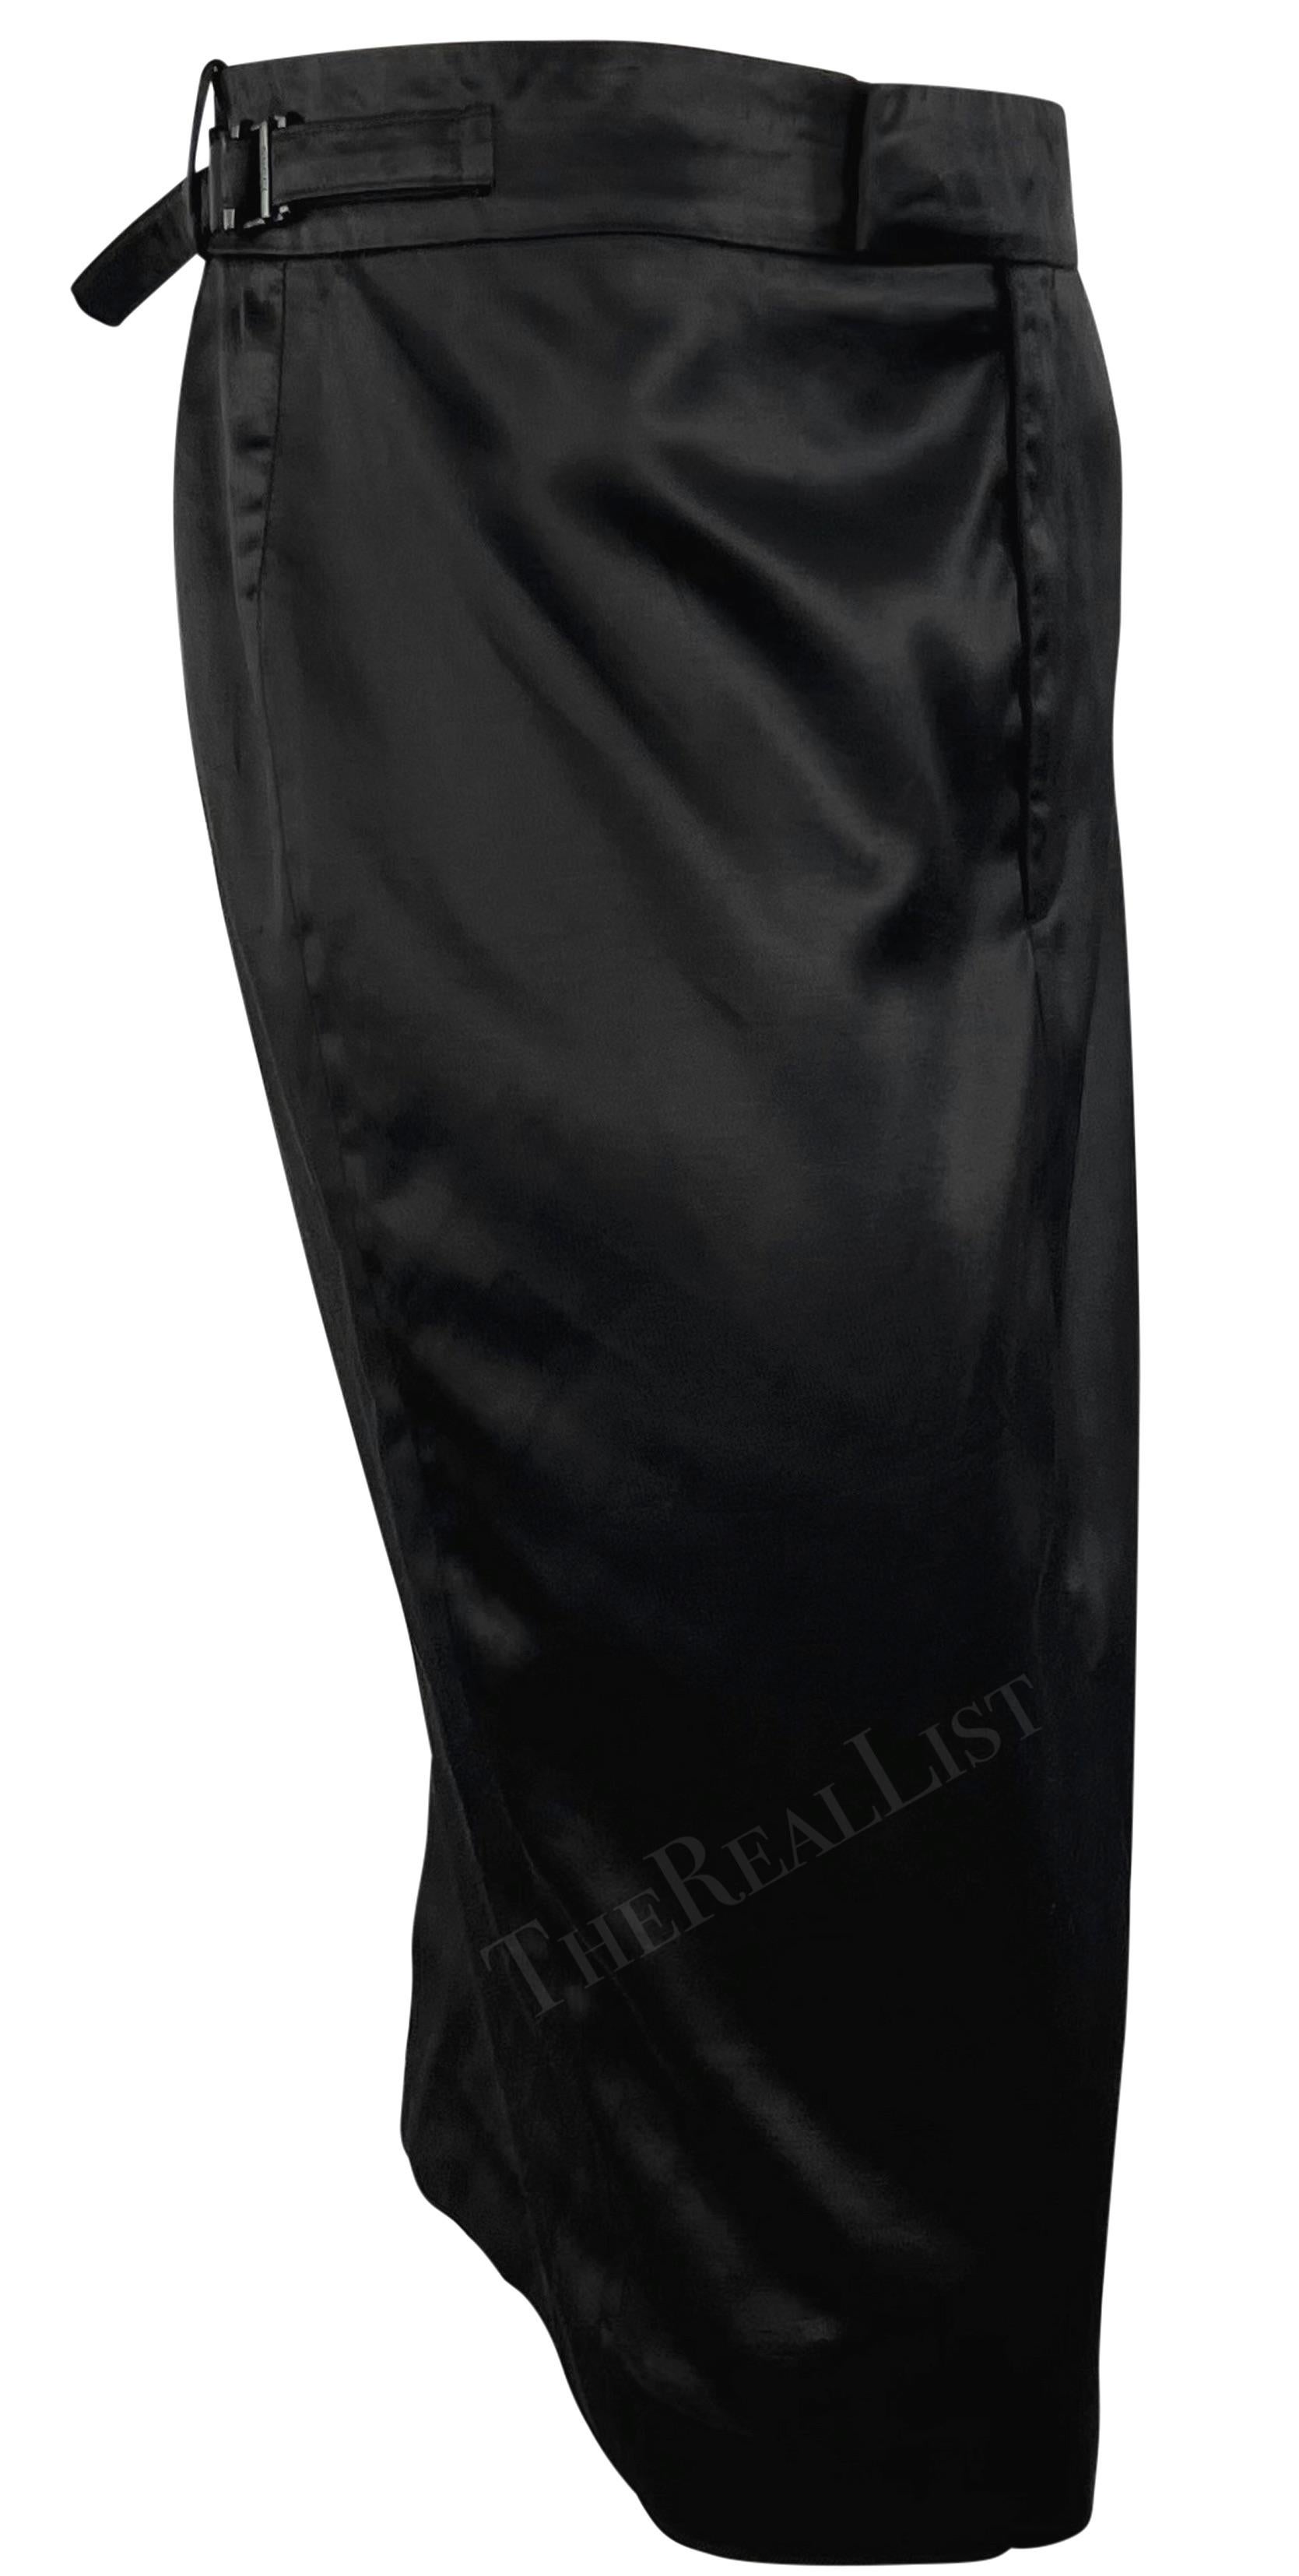 S/S 2001 Gucci by Tom Ford Black Satin Belted Runway Pencil Skirt  For Sale 2